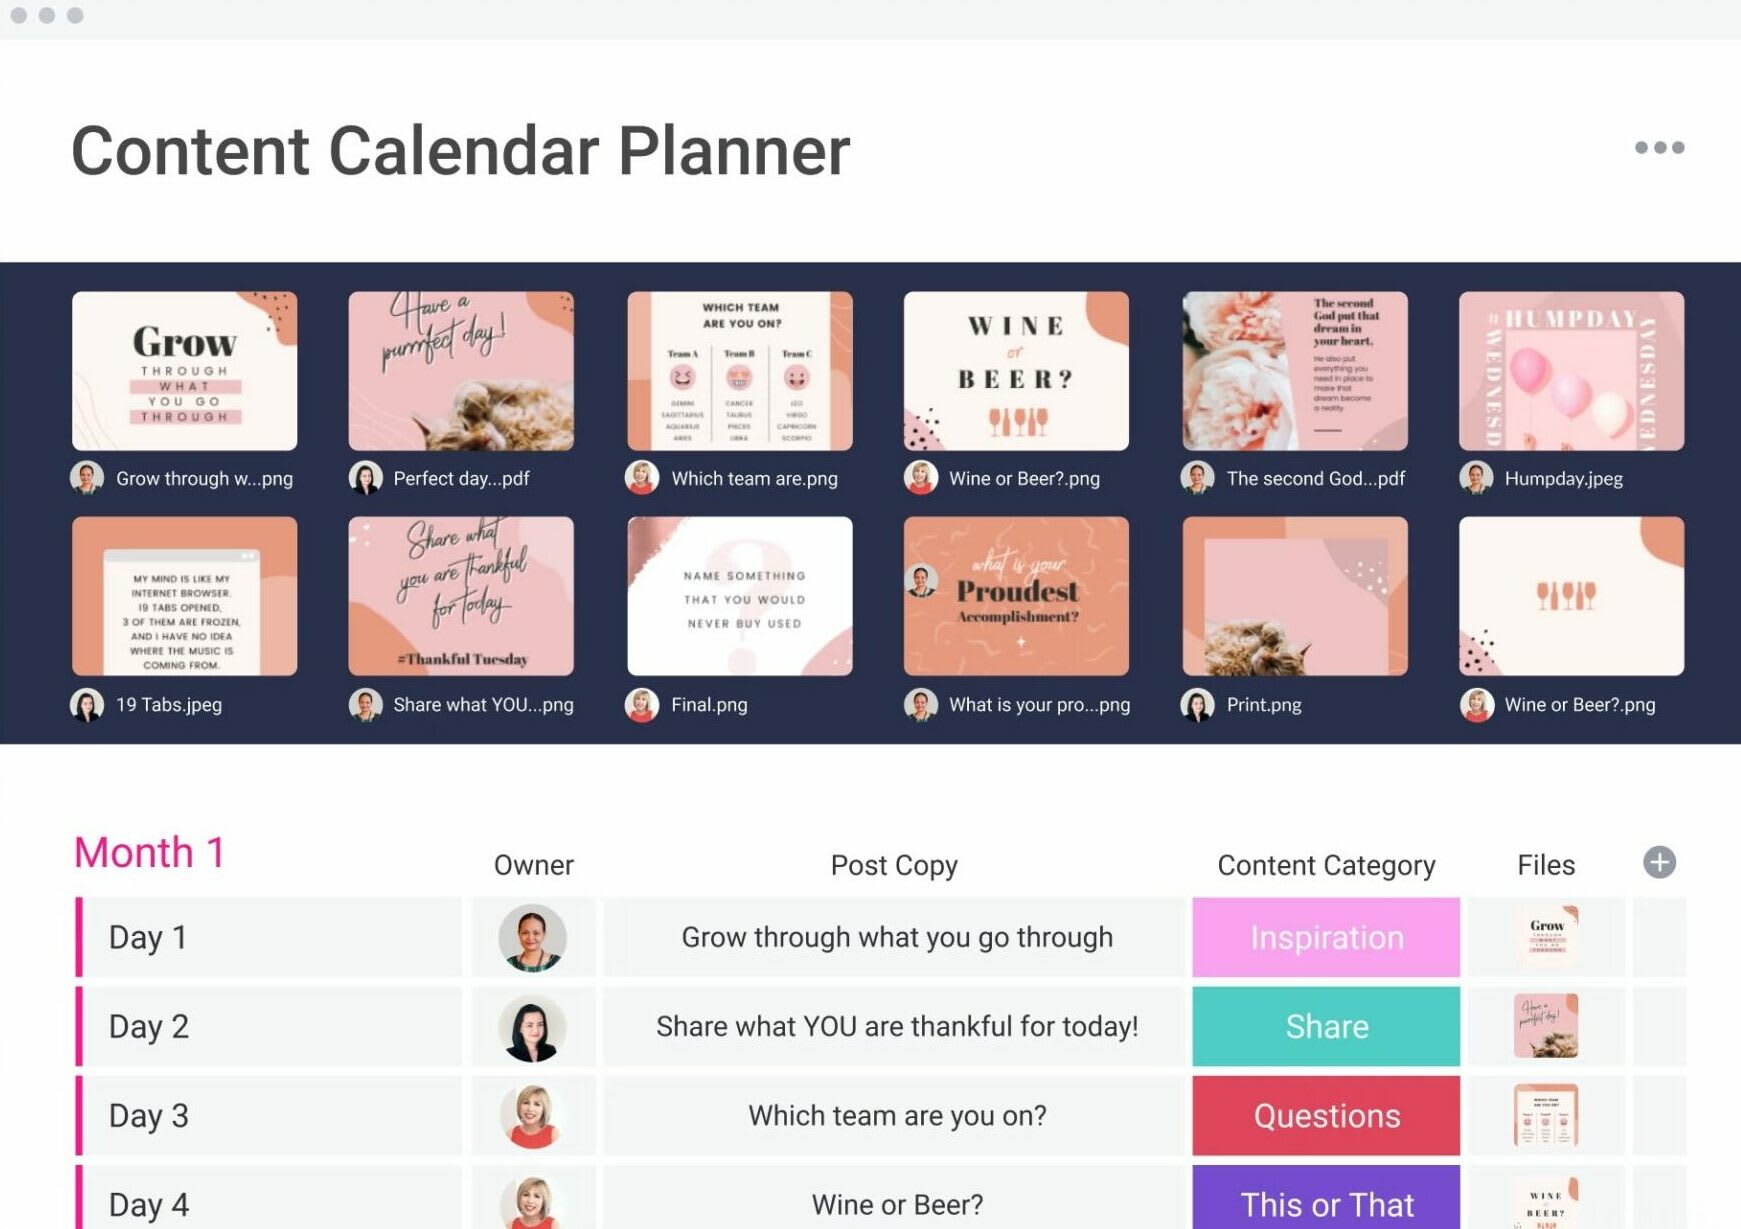 As part of a social CRM, this image depicts a monday.com content calendar planner template. It shows a board where social media copy and assets are planned for each day of a month.